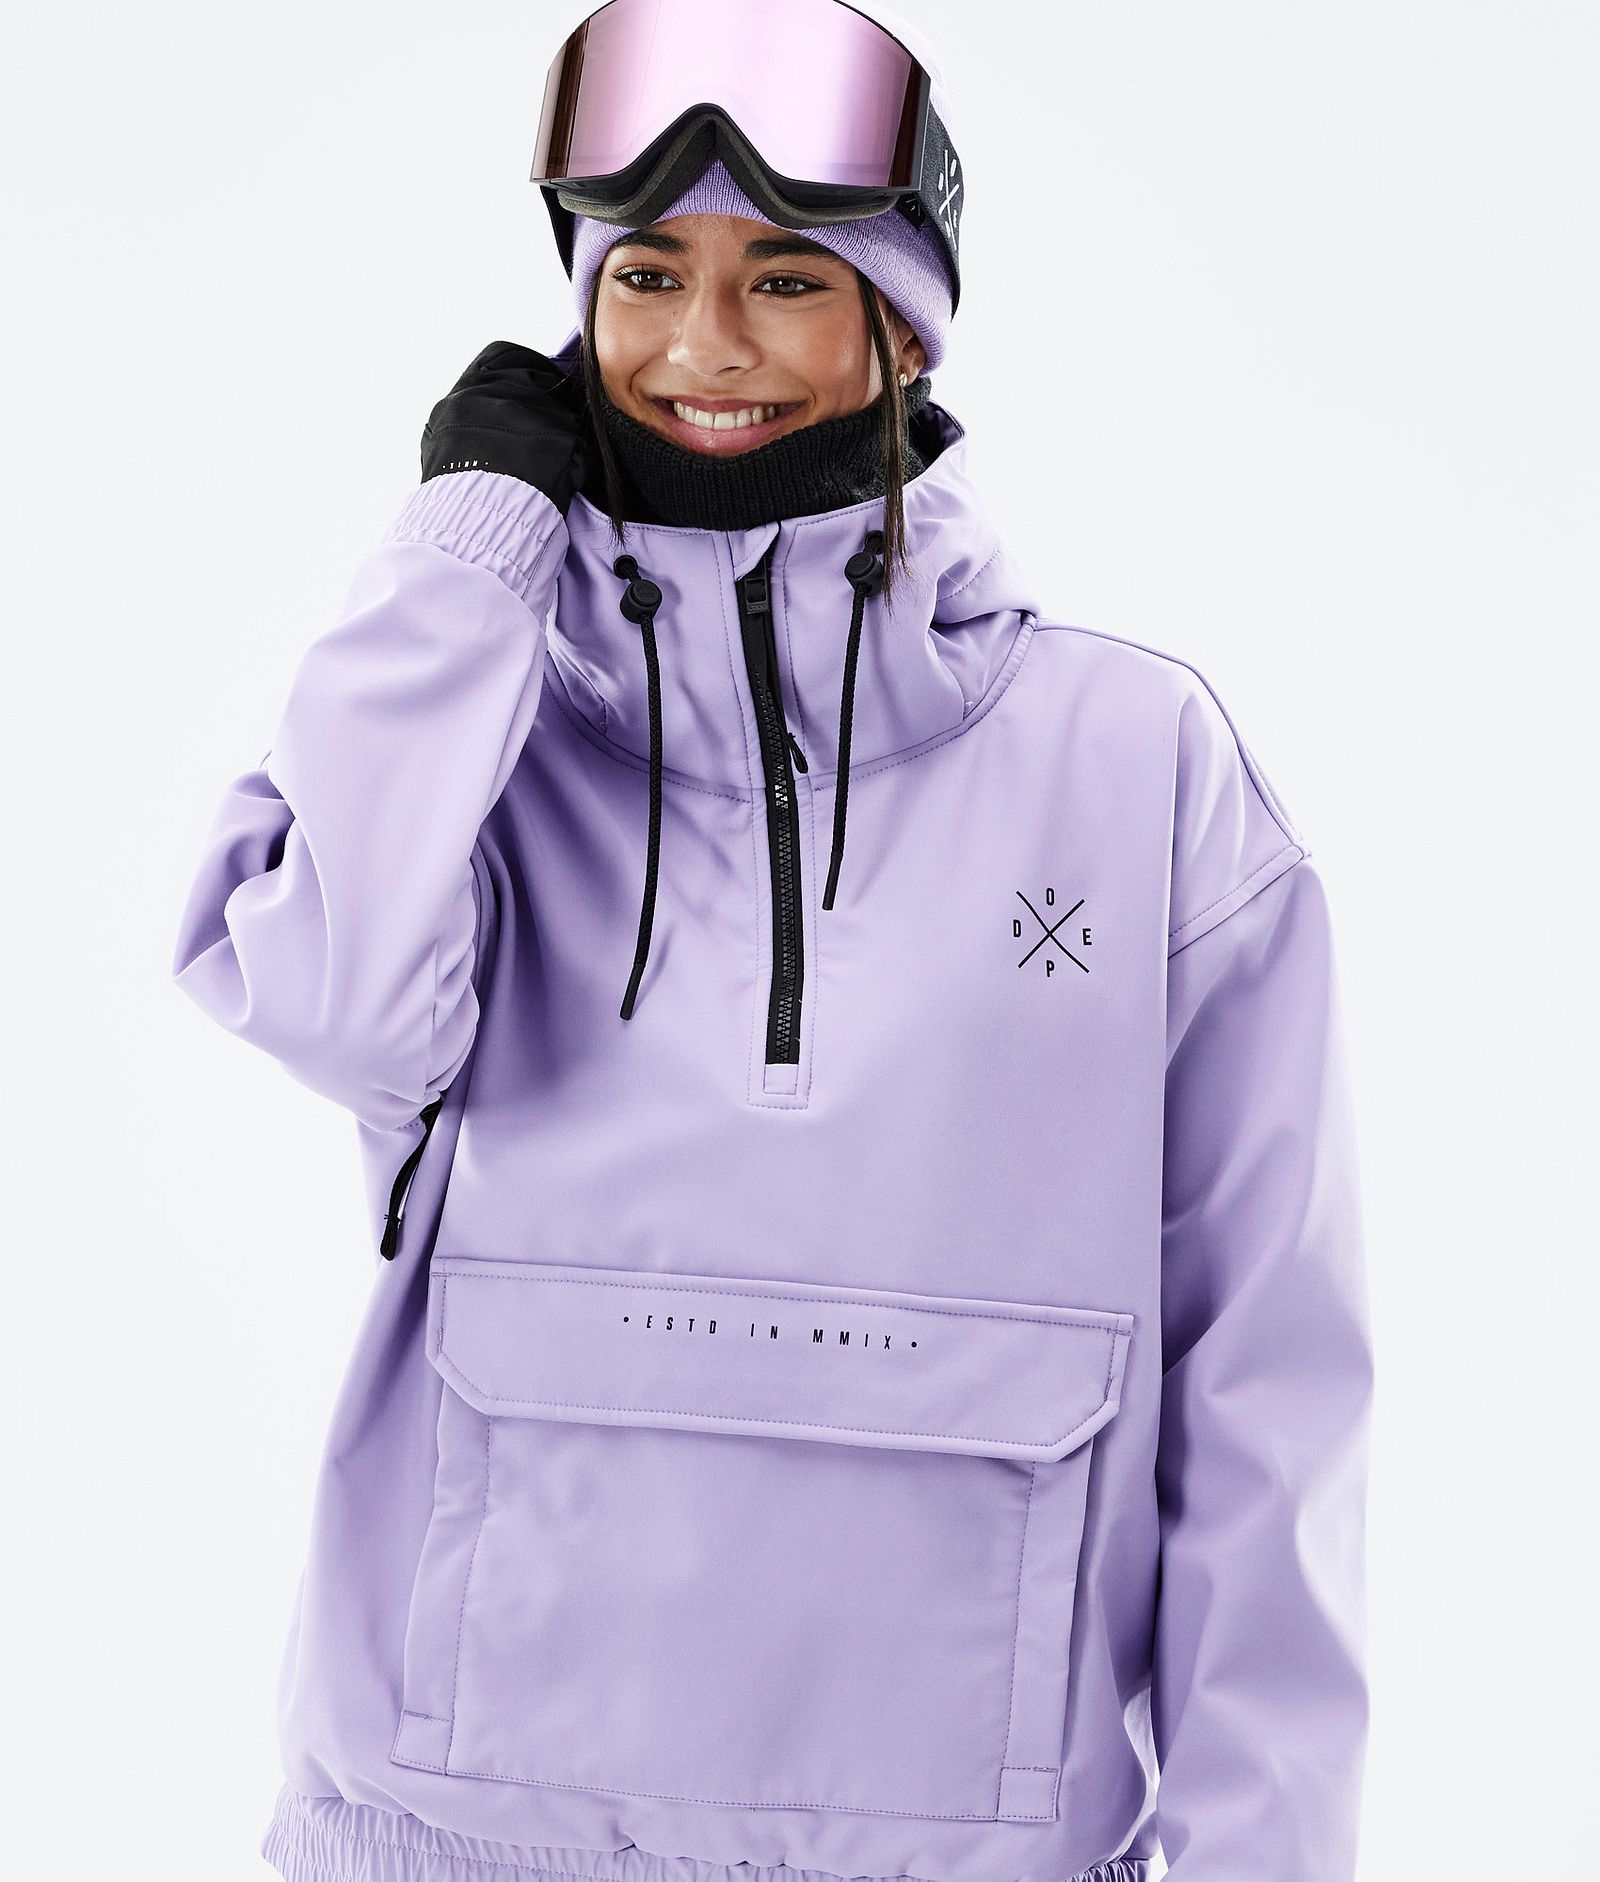 Cyclone W 2022 Ski Jacket Women Faded Violet, Image 2 of 9